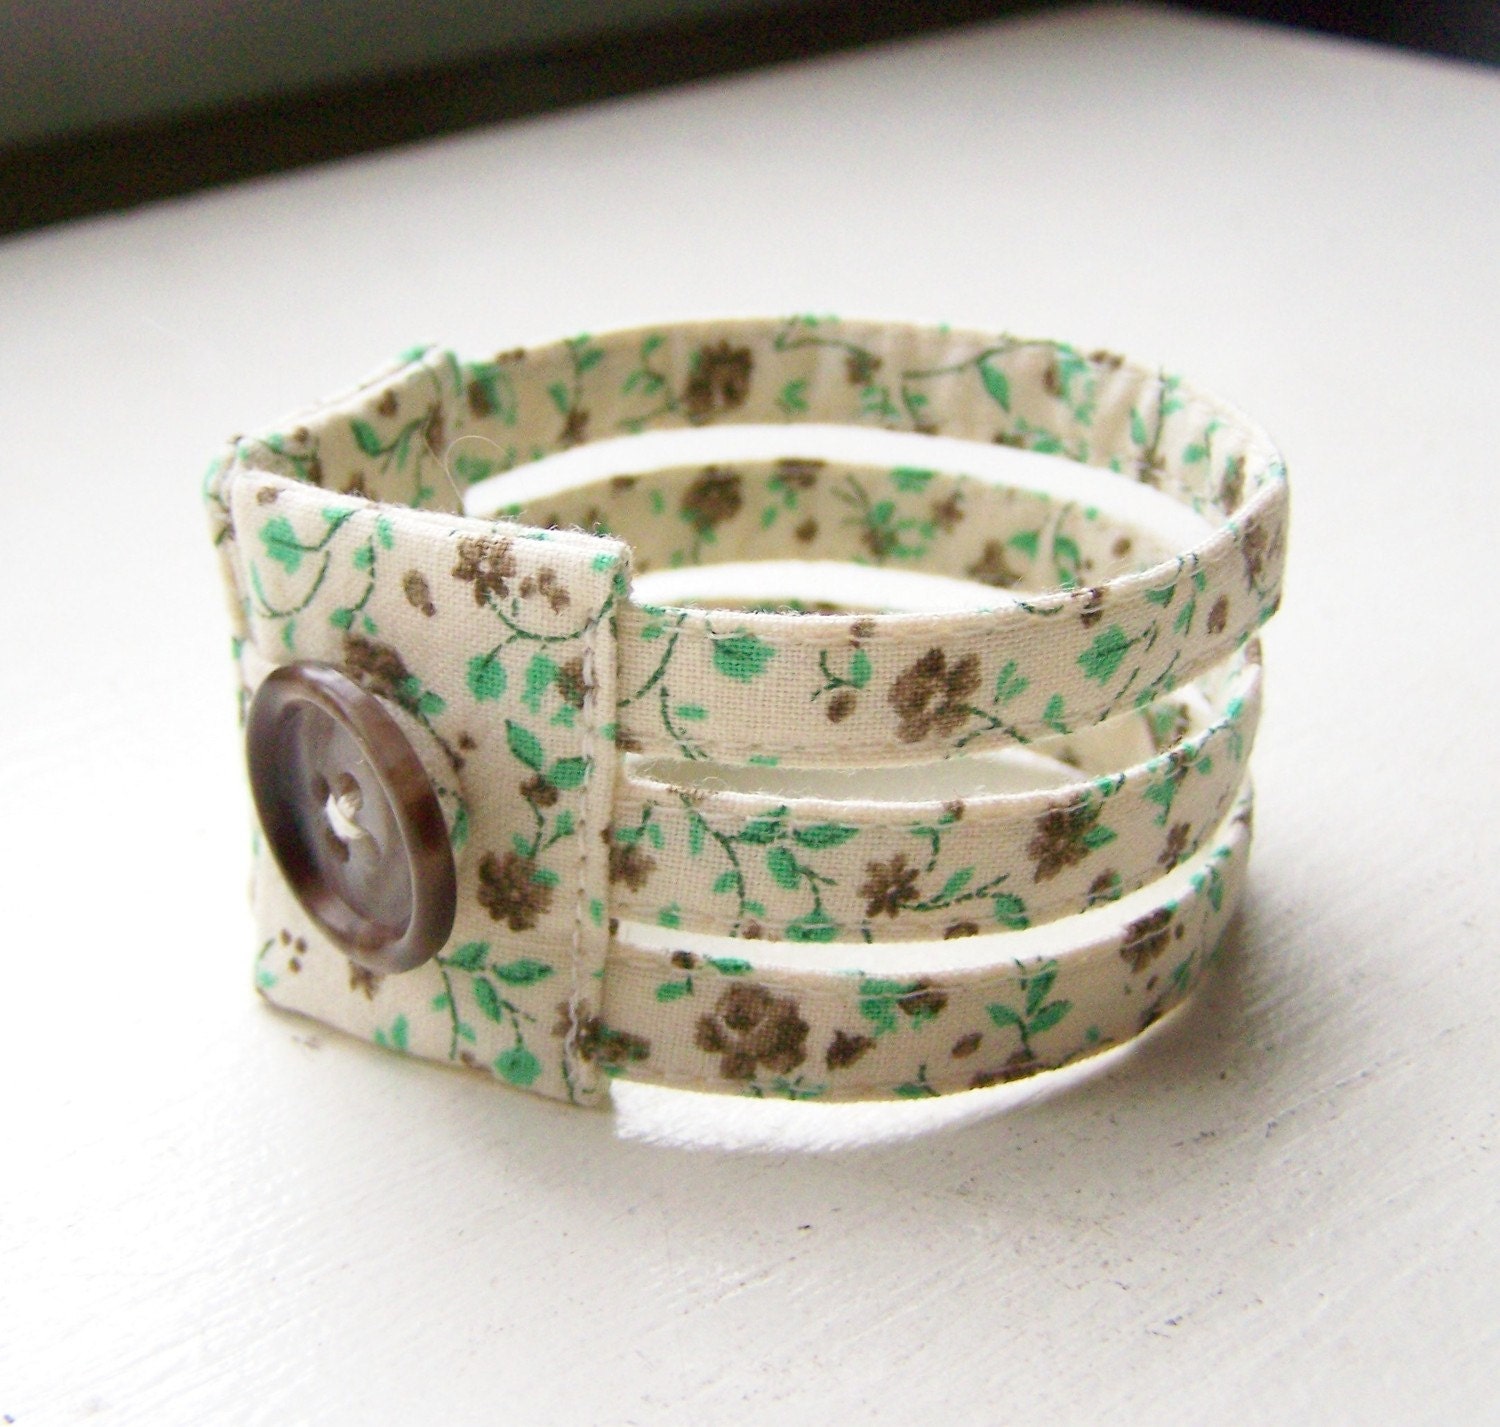 Triple strand dainty cuff bracelet in mint chocolate floral READY TO SHIP